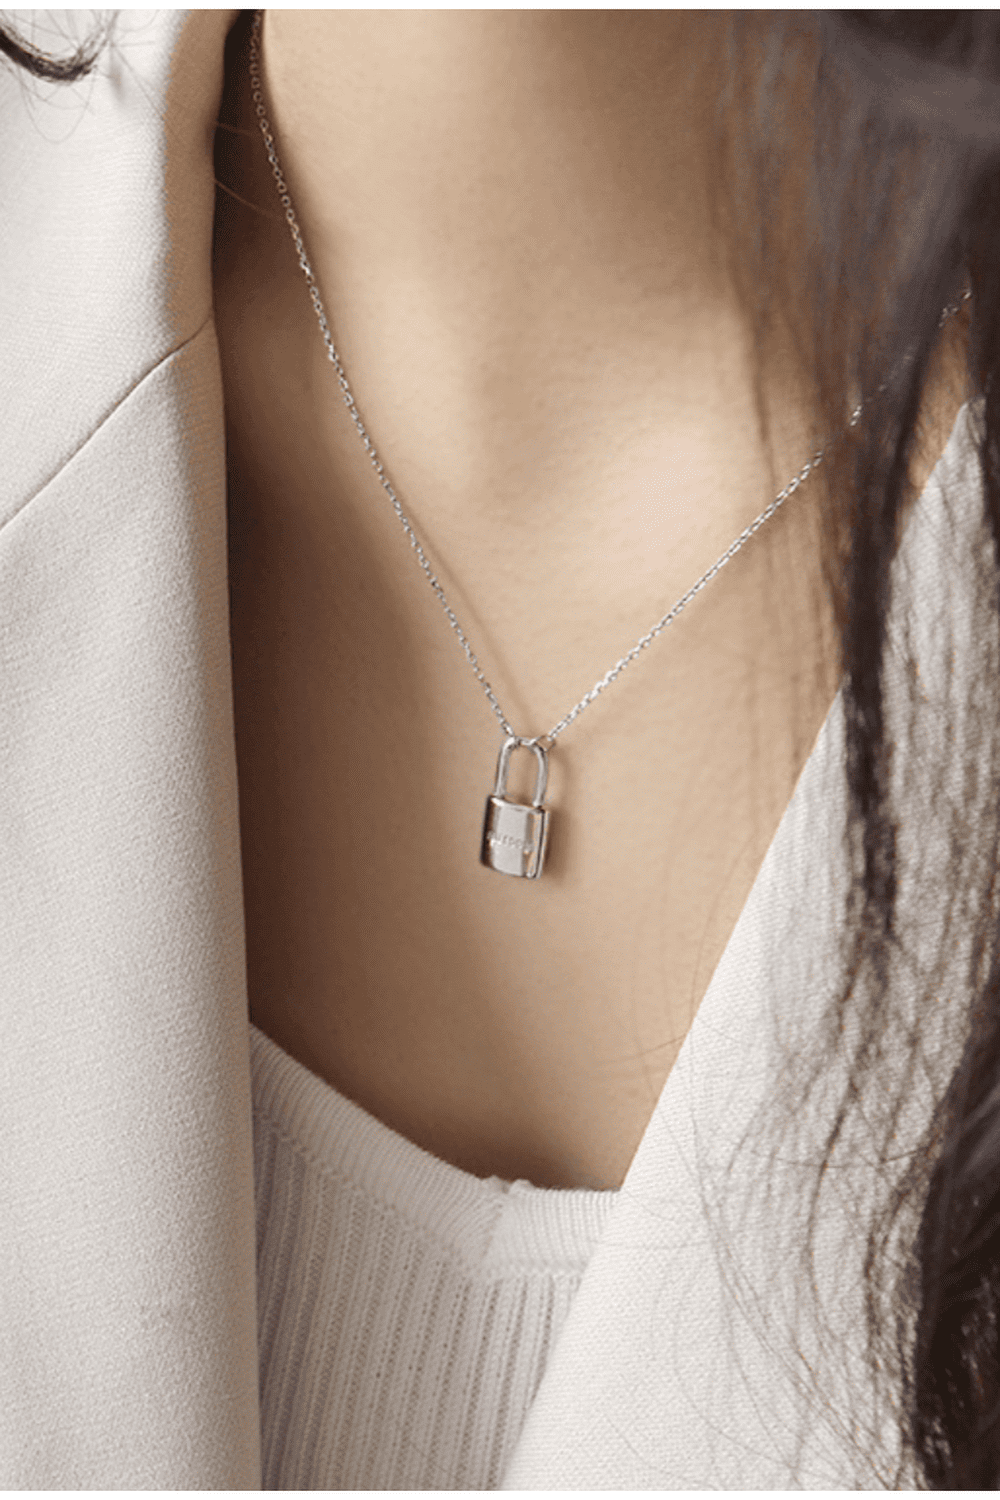 Freedom on Lock Necklace